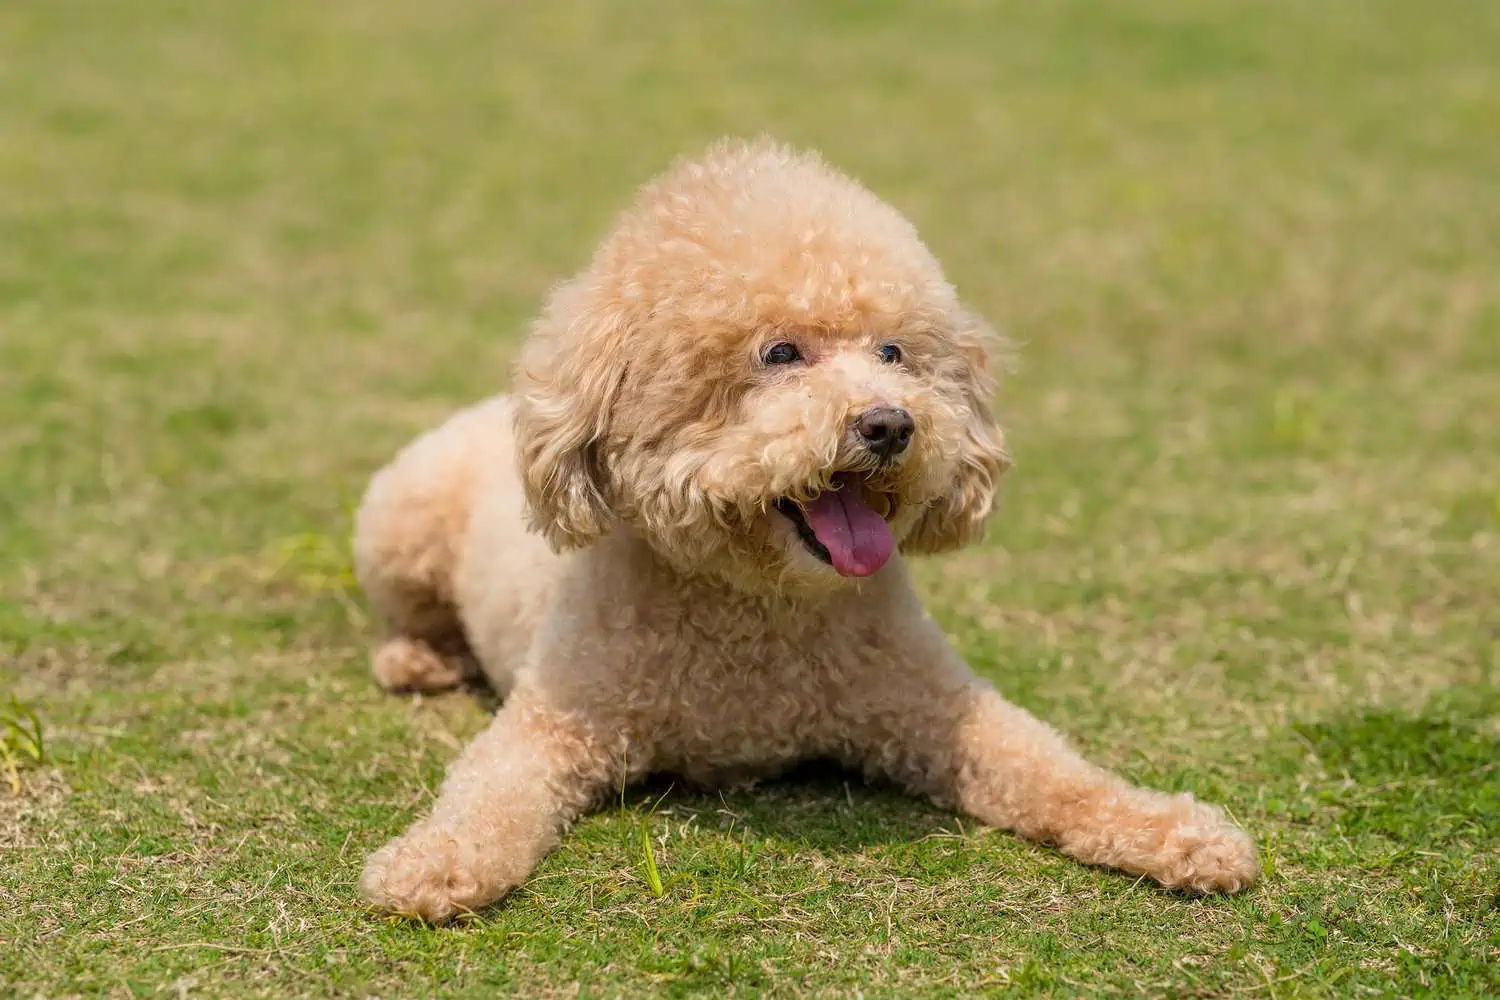 Cute poodle dog lying down on the green lawn